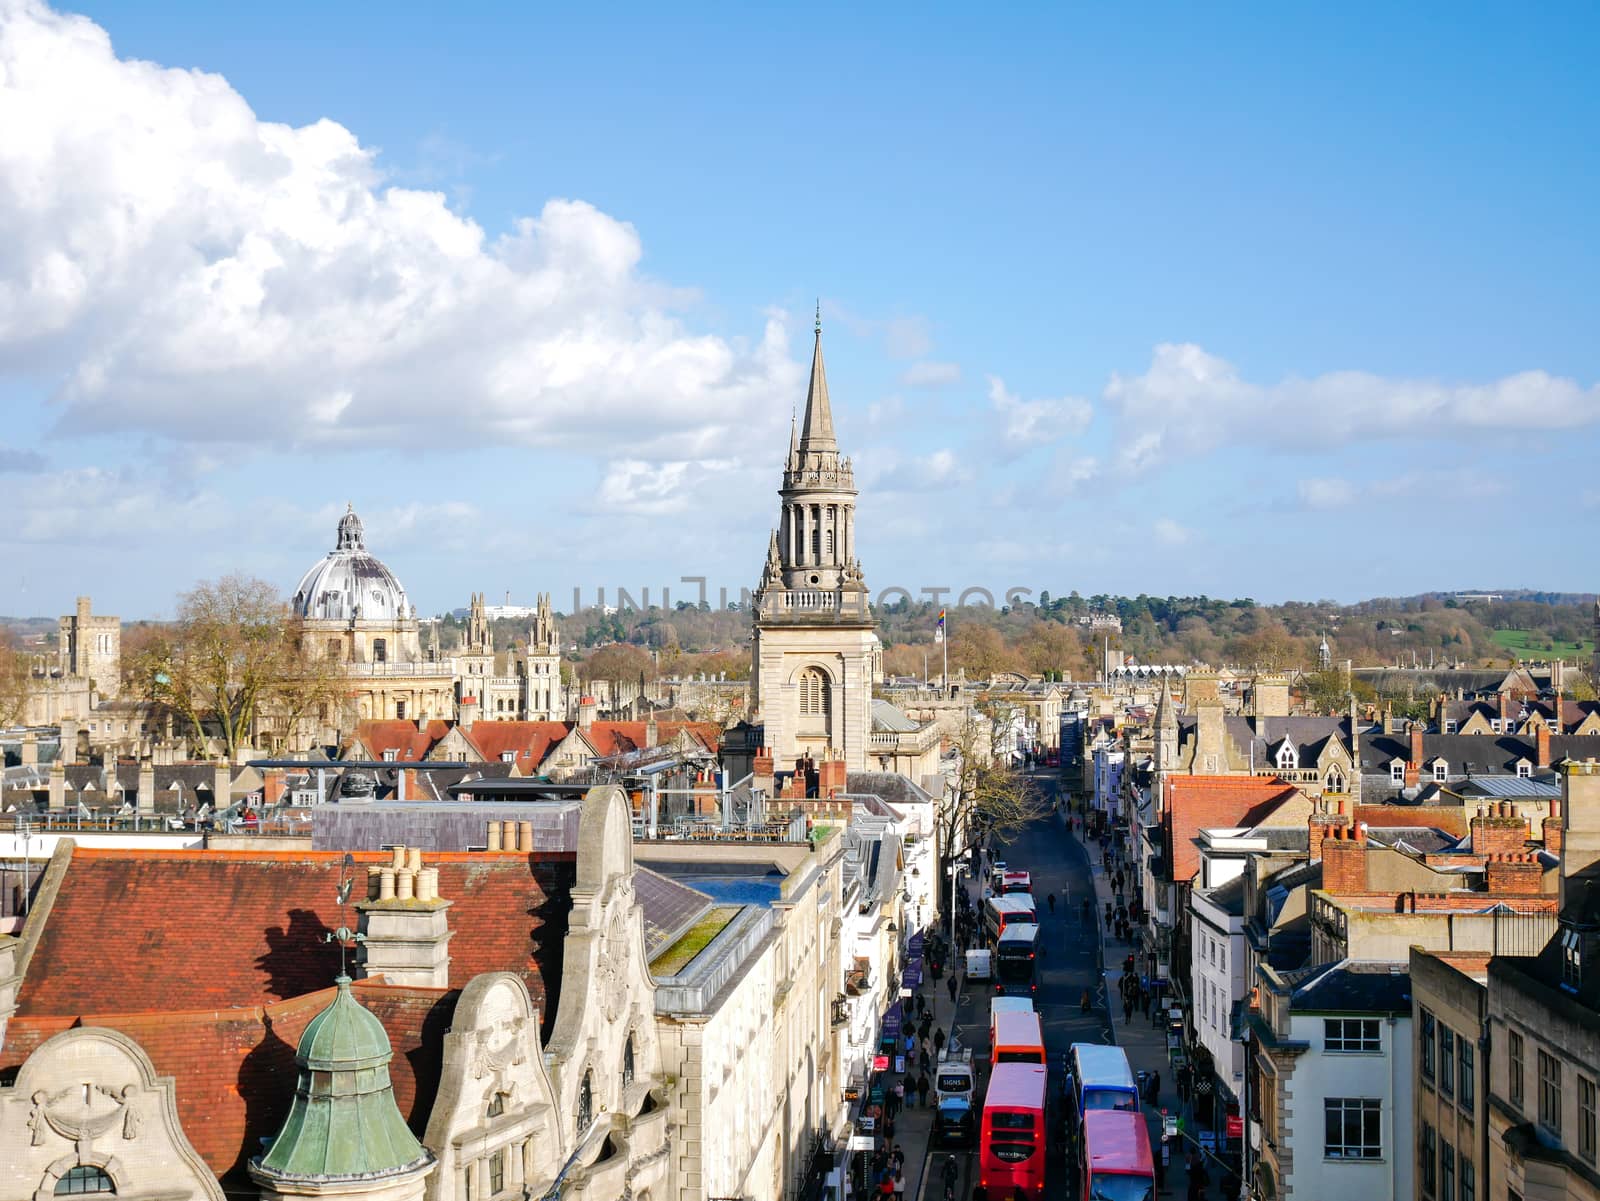 OXFORD, UK - FEBRUARY 10, 2018: Oxford city, one of the oldest city in UK, from the above view